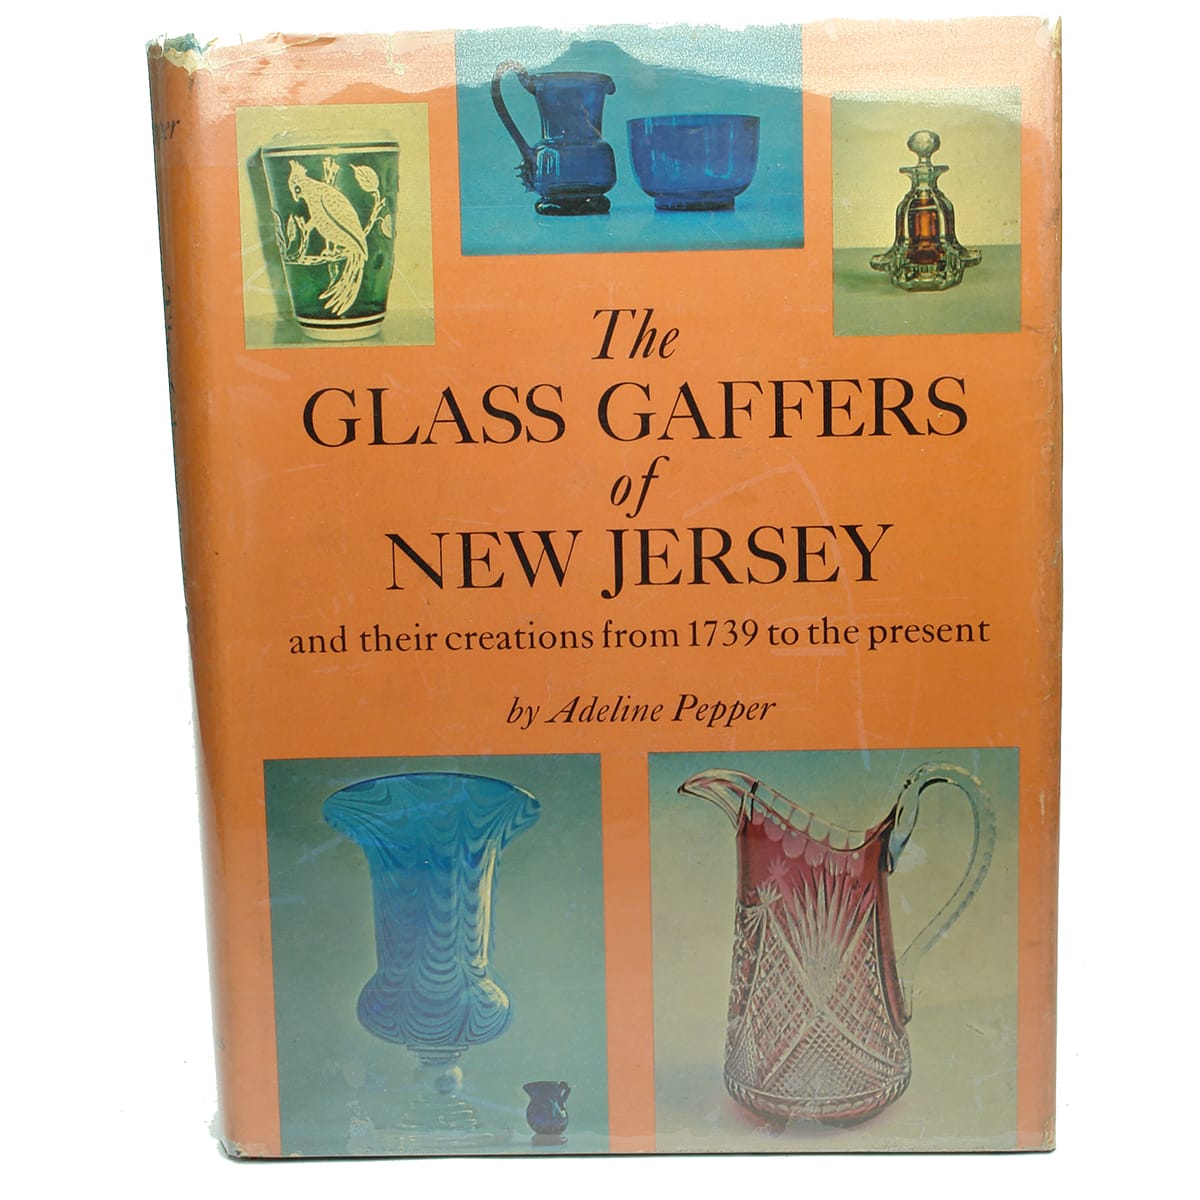 Book. The Glass Gaffers of New Jersey and their creations from 1739 to the present, by Adeline Pepper.